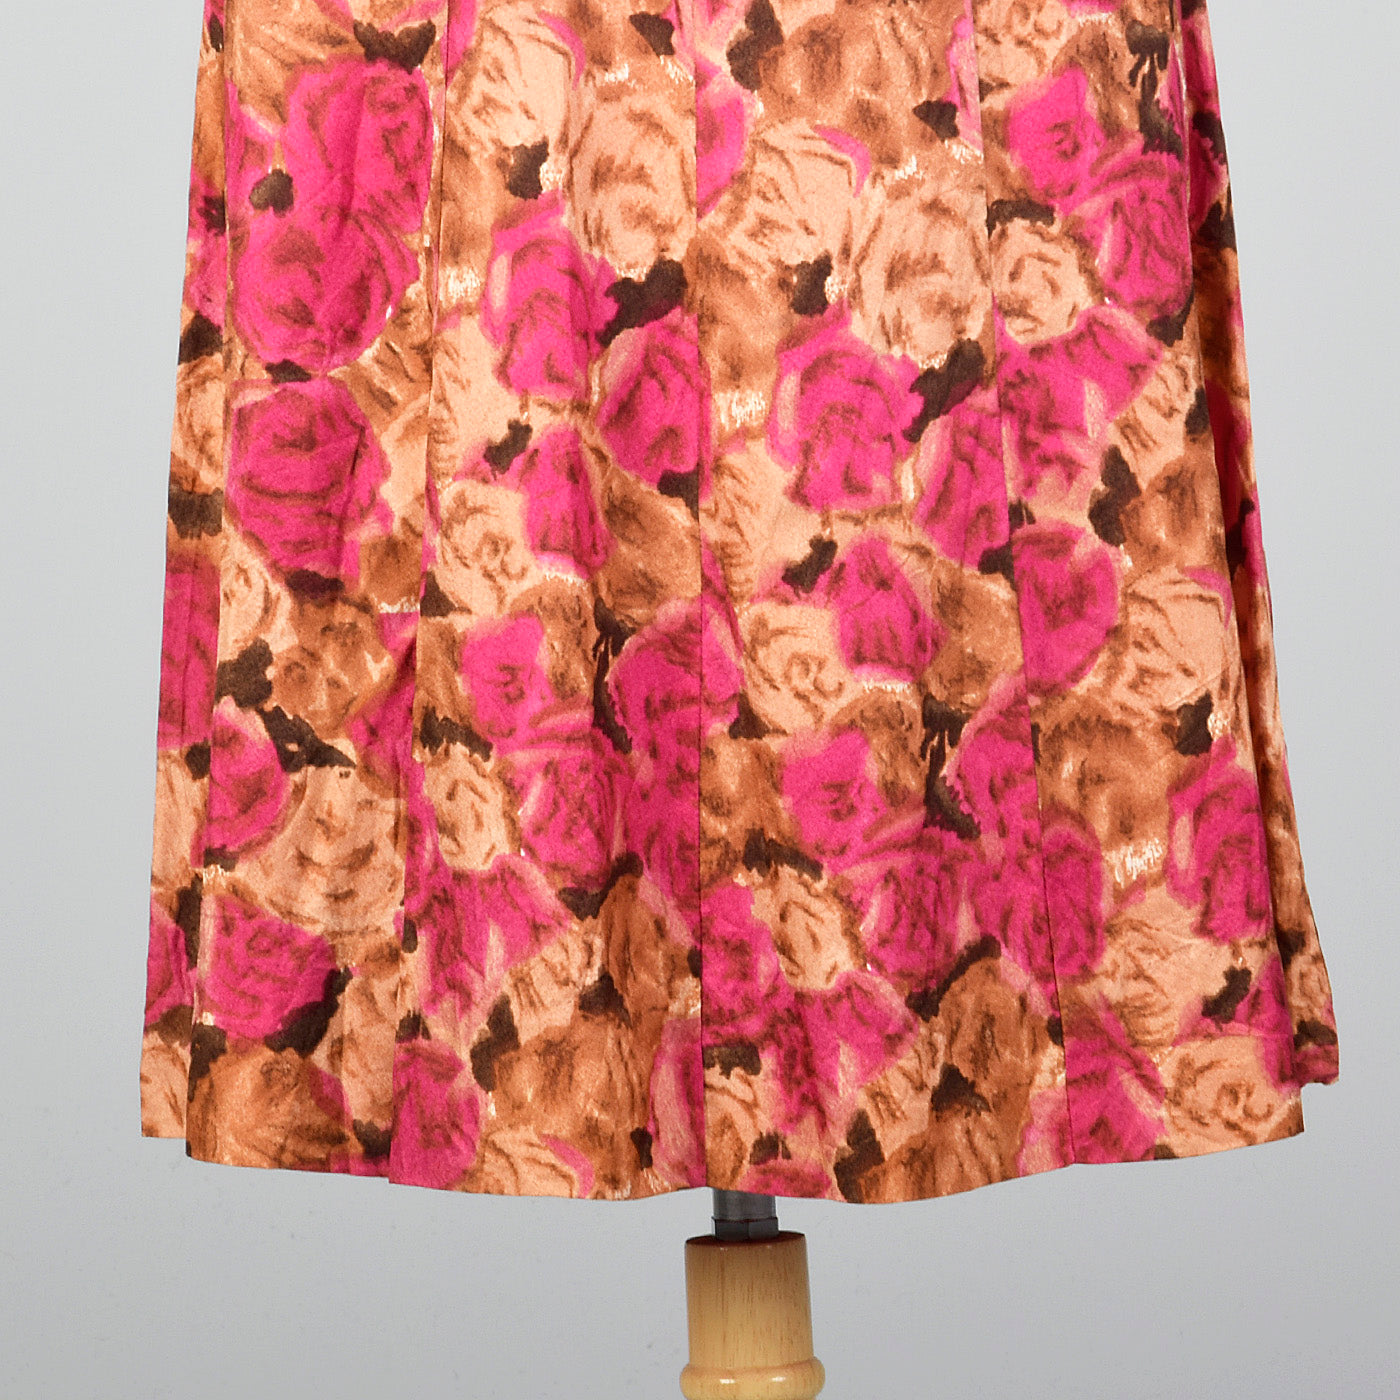 1950s Floral Dress with Sheer Detail Collar and Sleeves